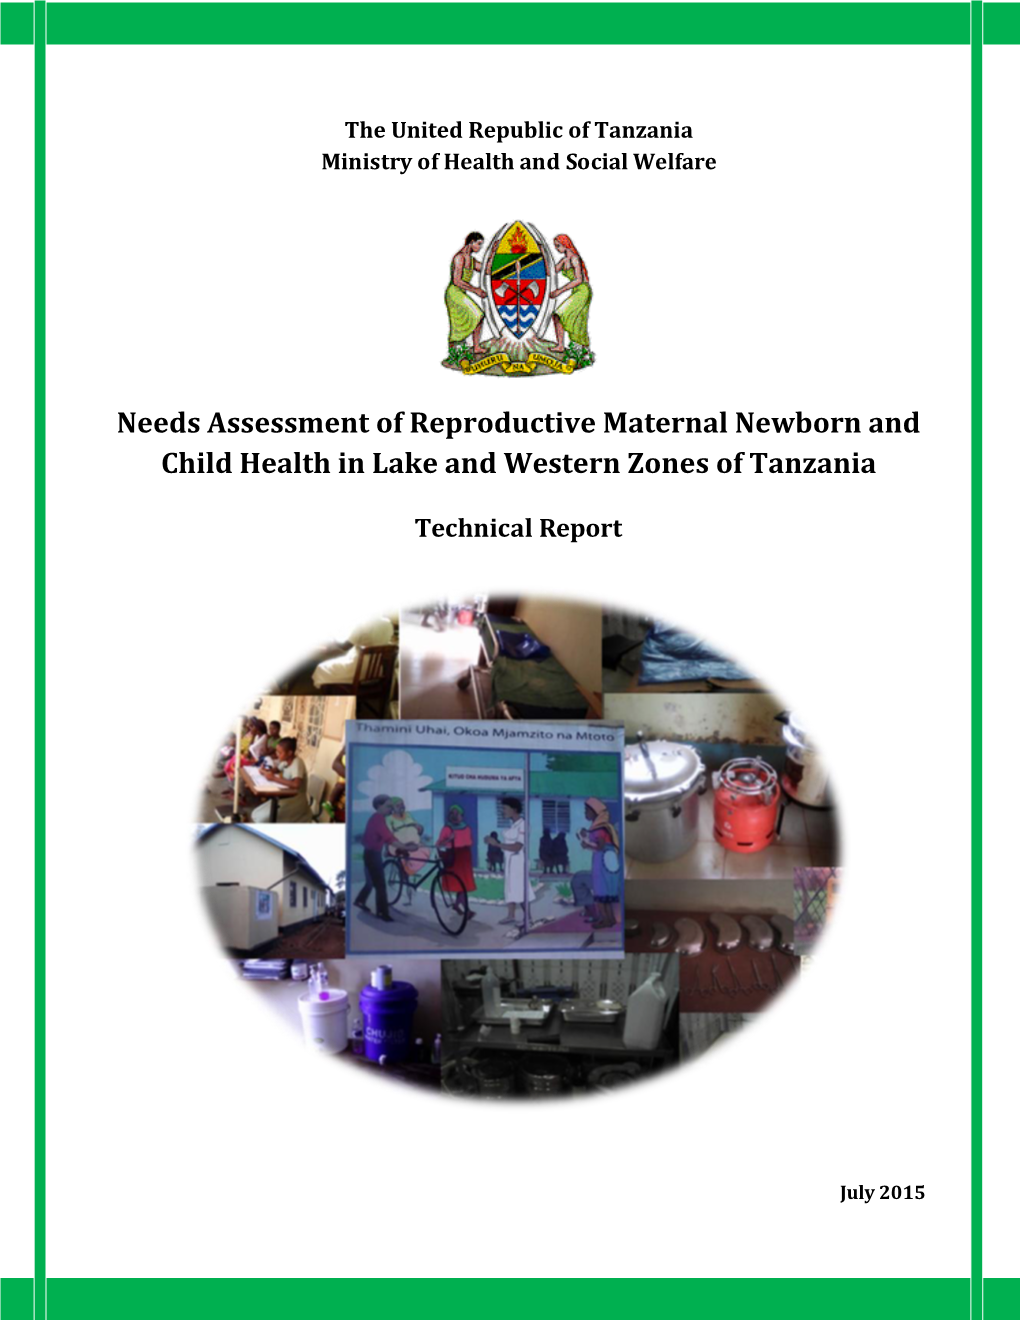 Needs Assessment of Reproductive Maternal Newborn and Child Health in Lake and Western Zones of Tanzania